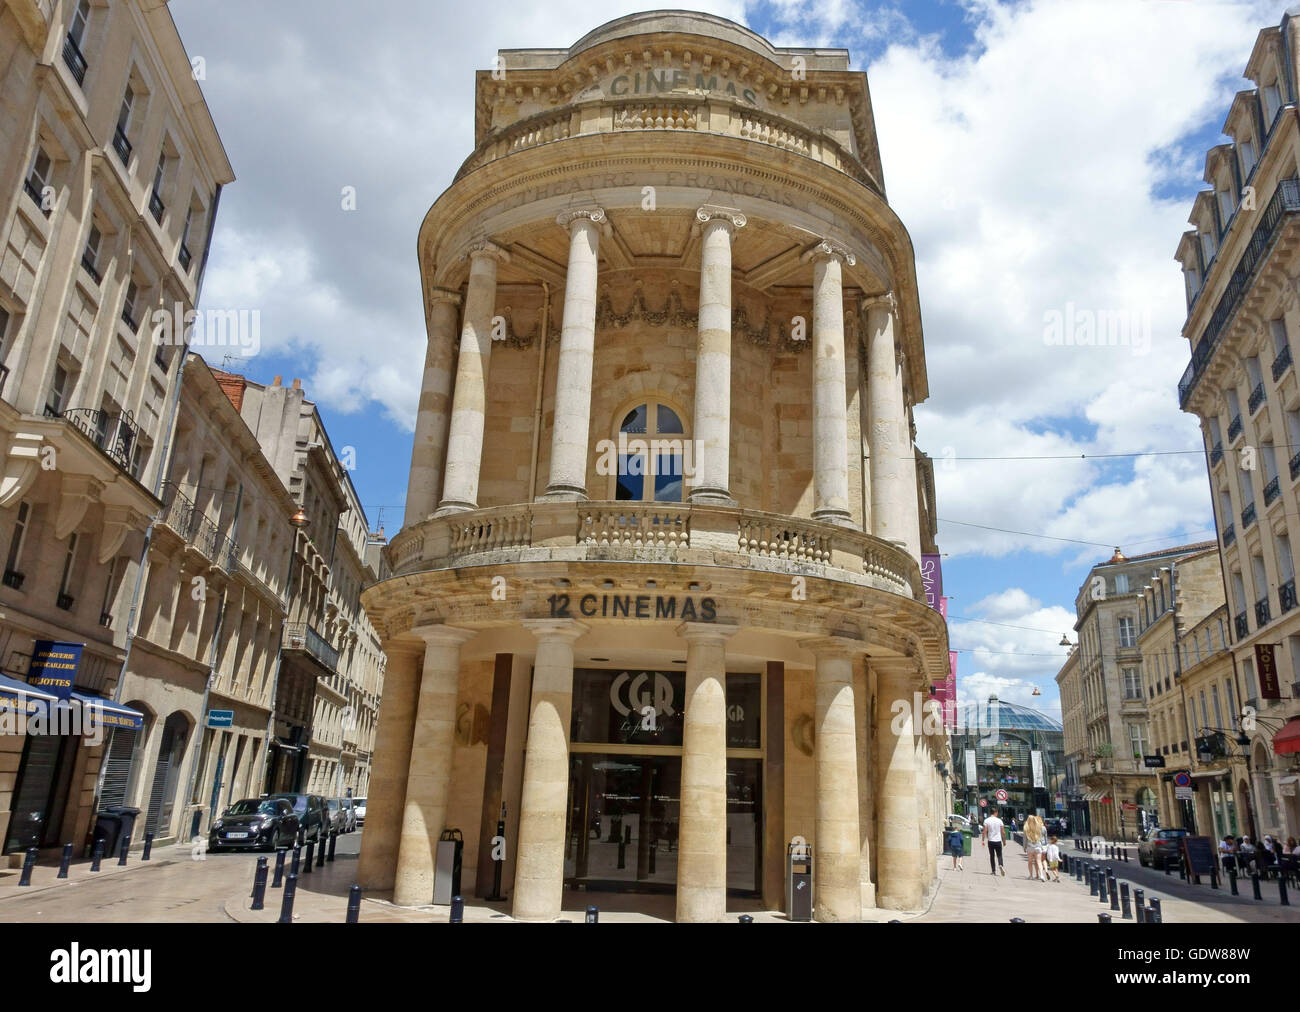 12 screen CGR cinema in old theatre building in Bordeaux, France Stock Photo